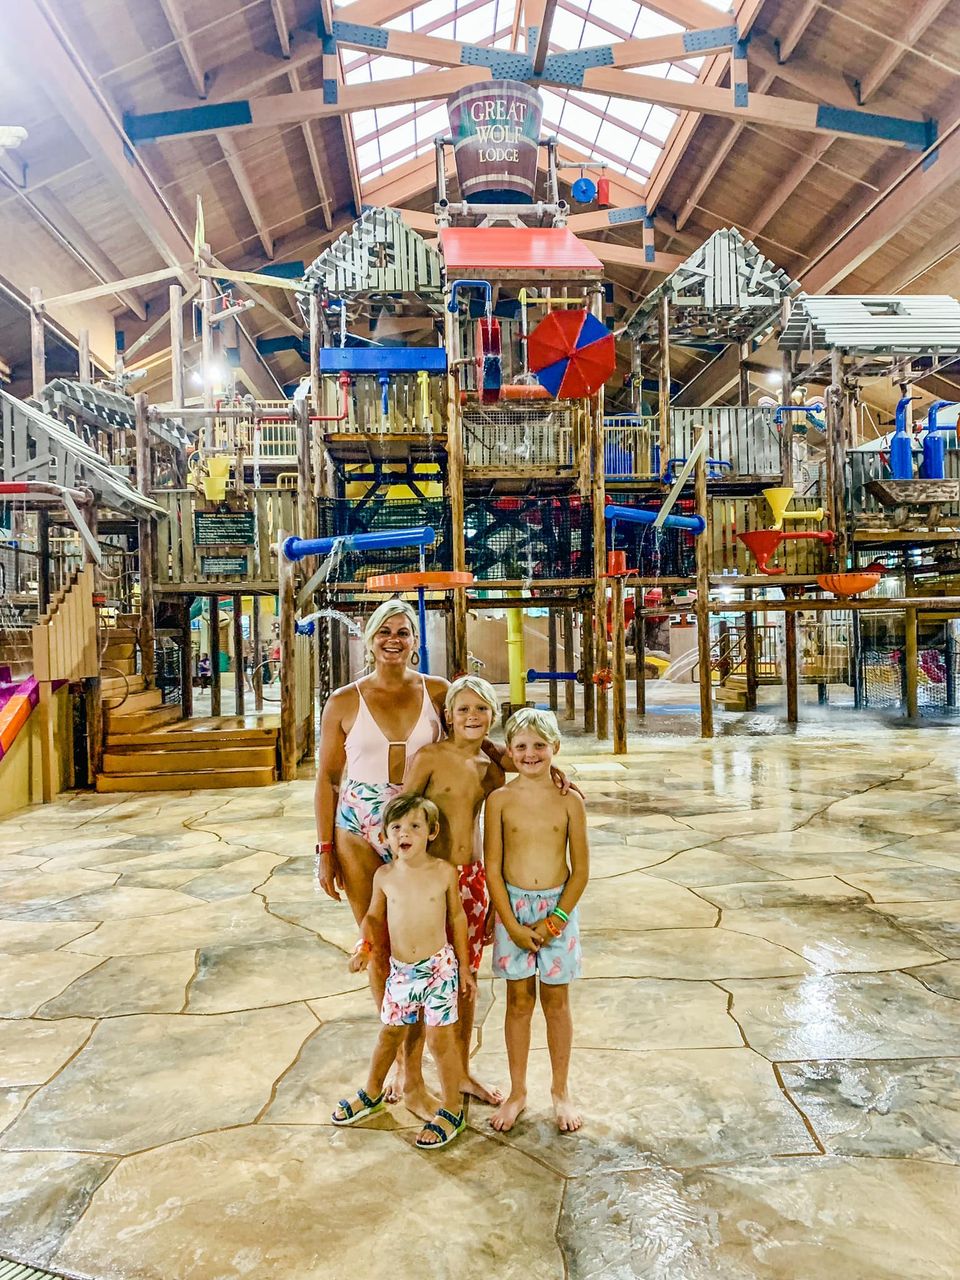 Visit Great Wolf Lodge for Family Fun in Traverse City